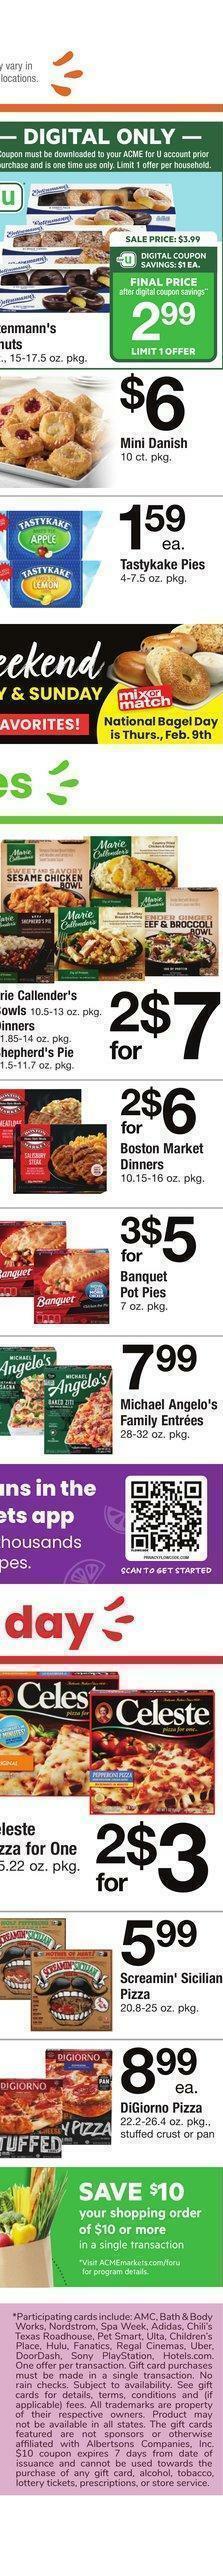 ACME Markets Weekly Ad from February 3